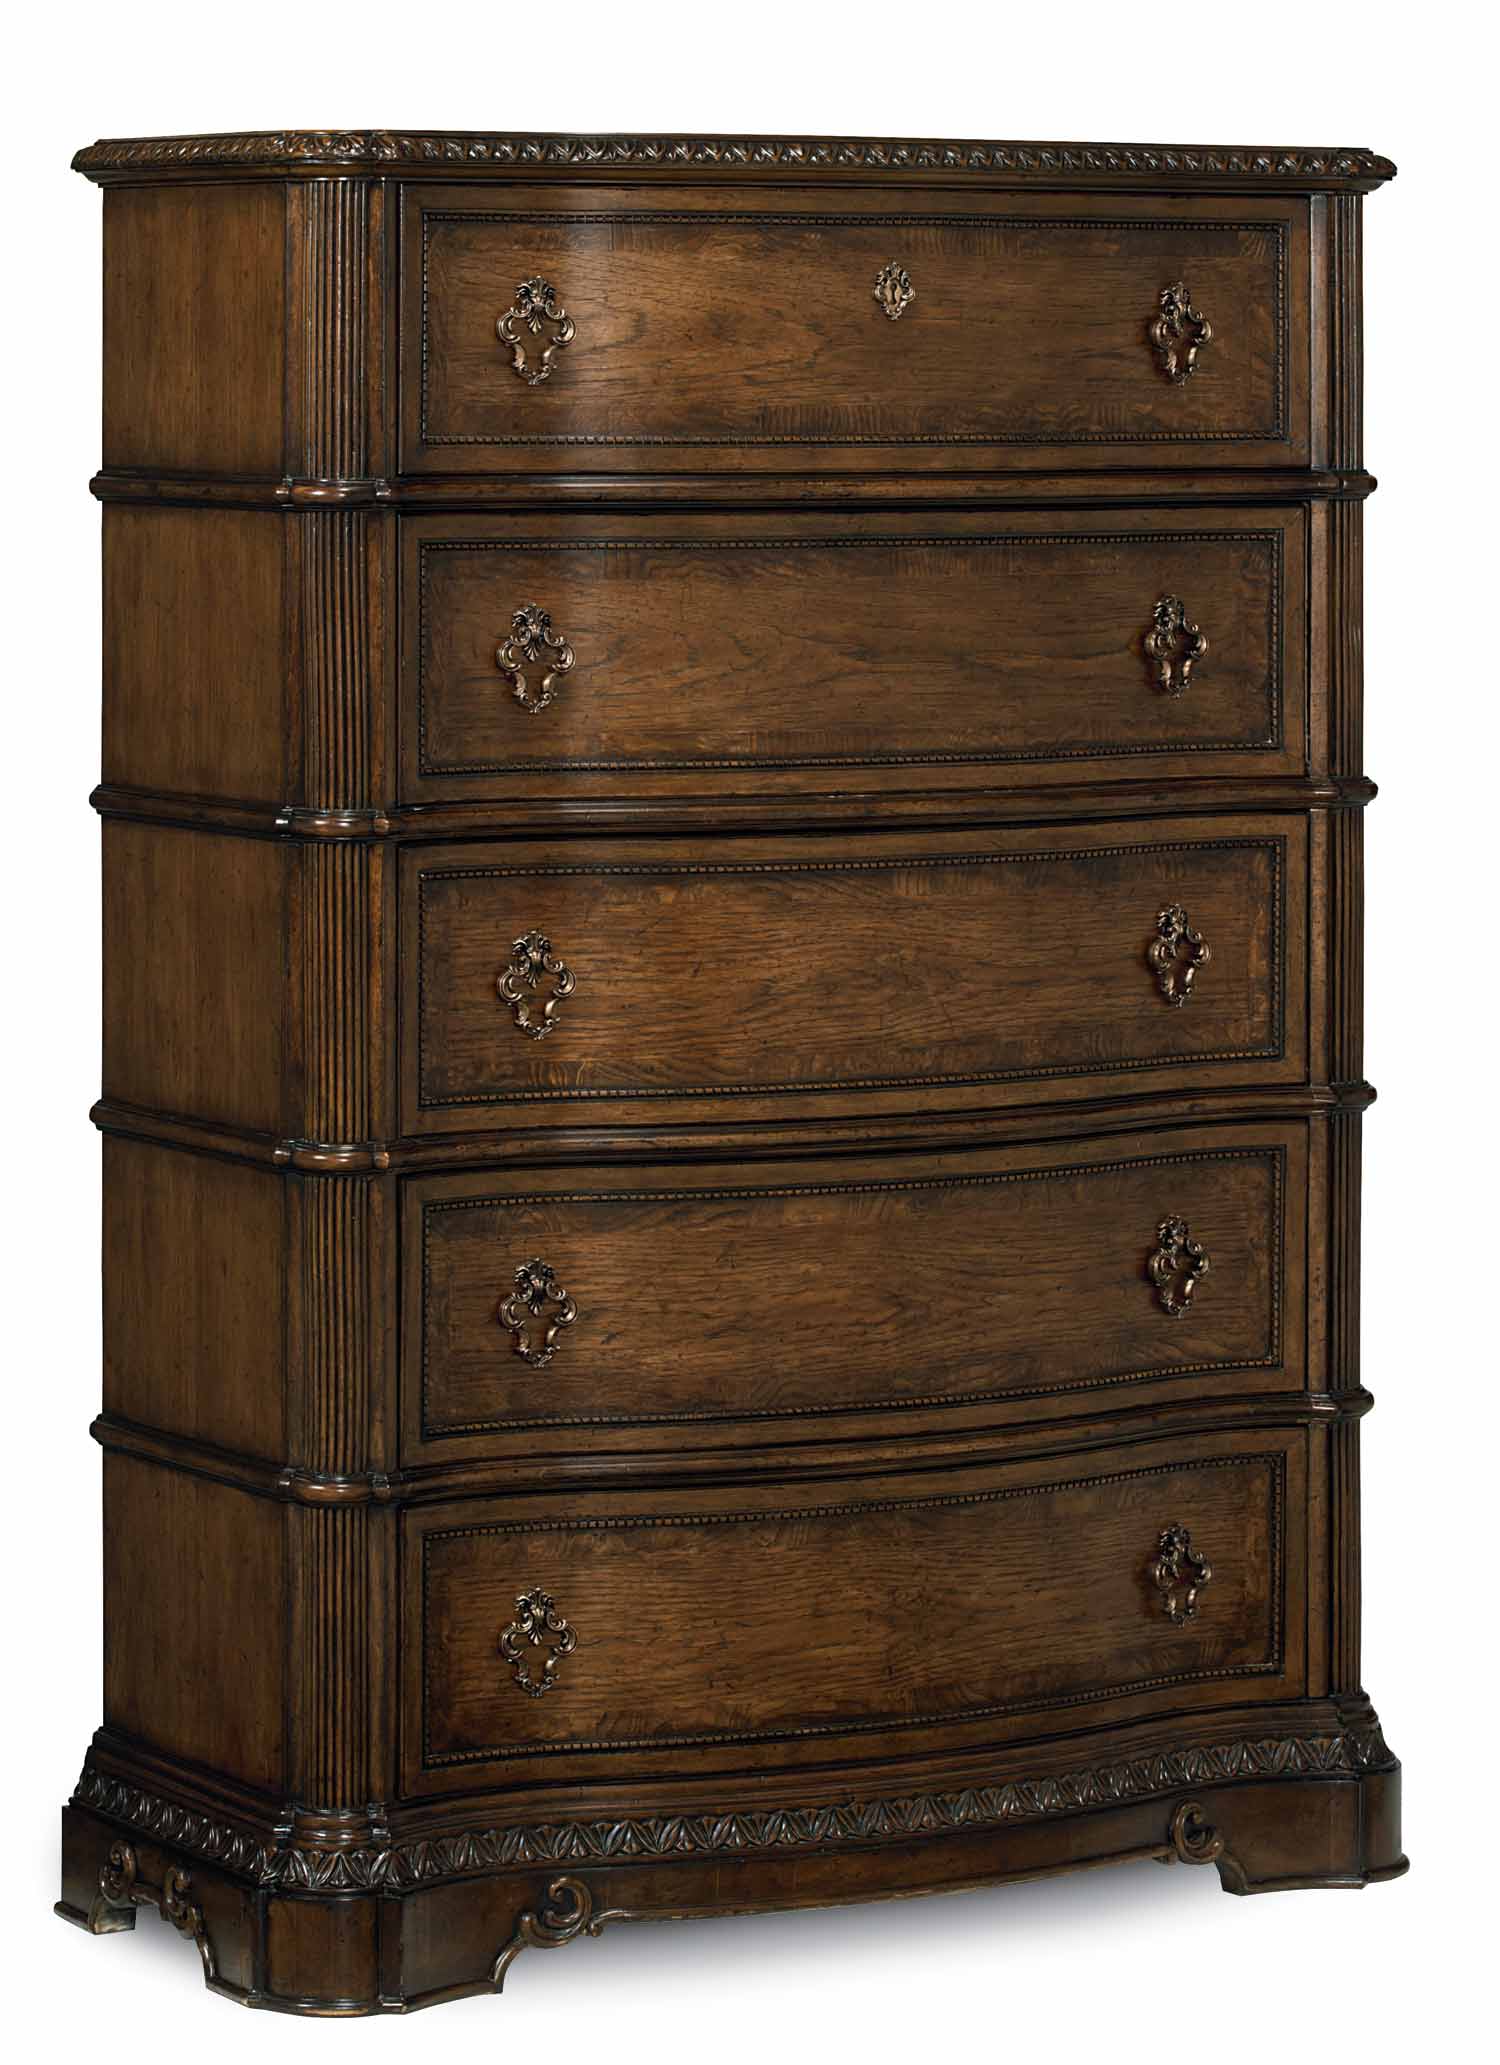 Legacy Classic Pemberleigh Drawer Chest - Brandy/Burnished Edges